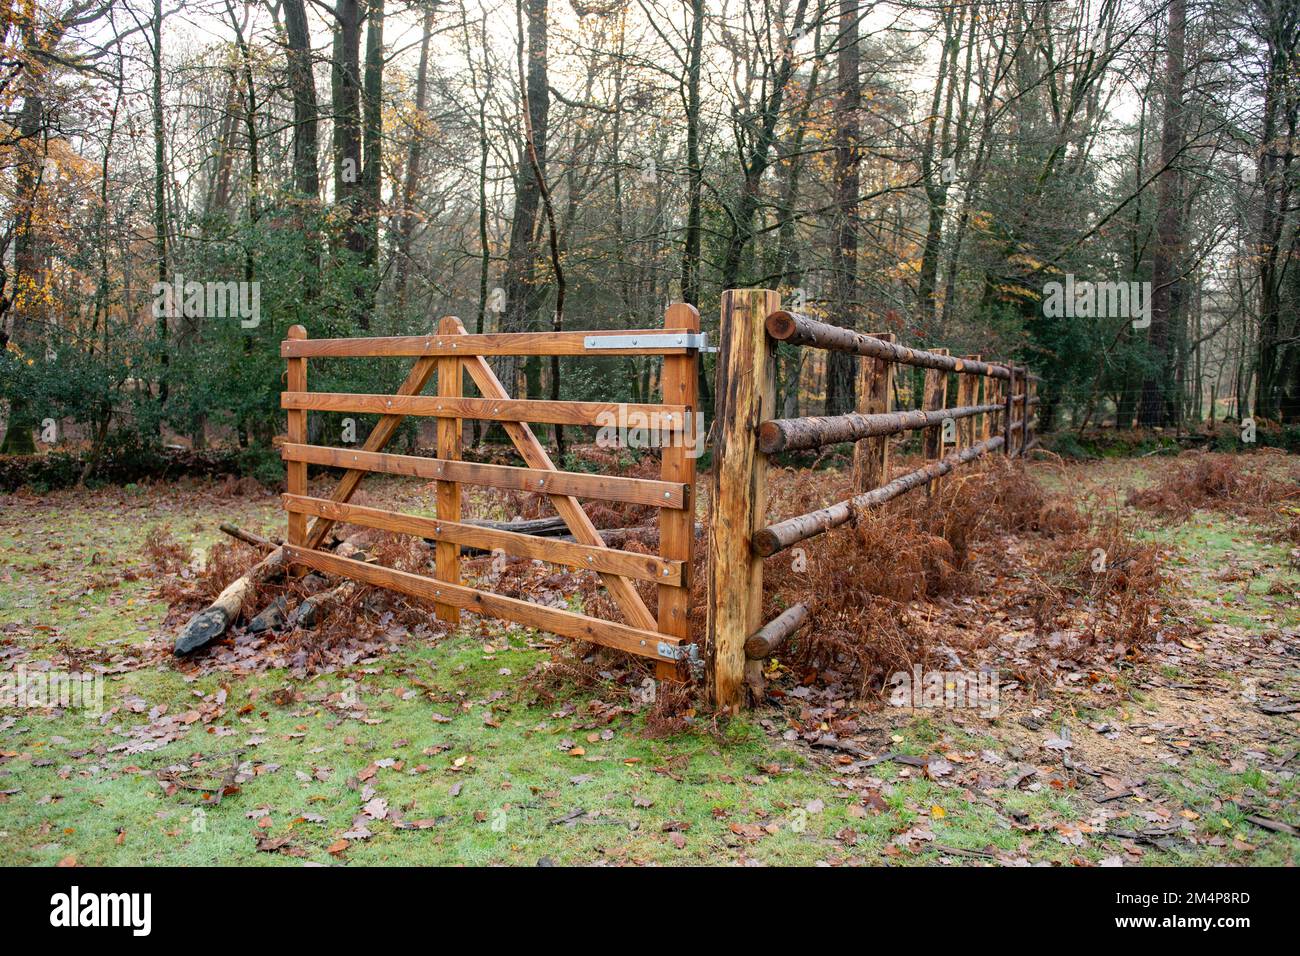 Fences and enclosures in the new forest Hampshire England to herd and control the various live stock that live in the forest enclosures. Stock Photo